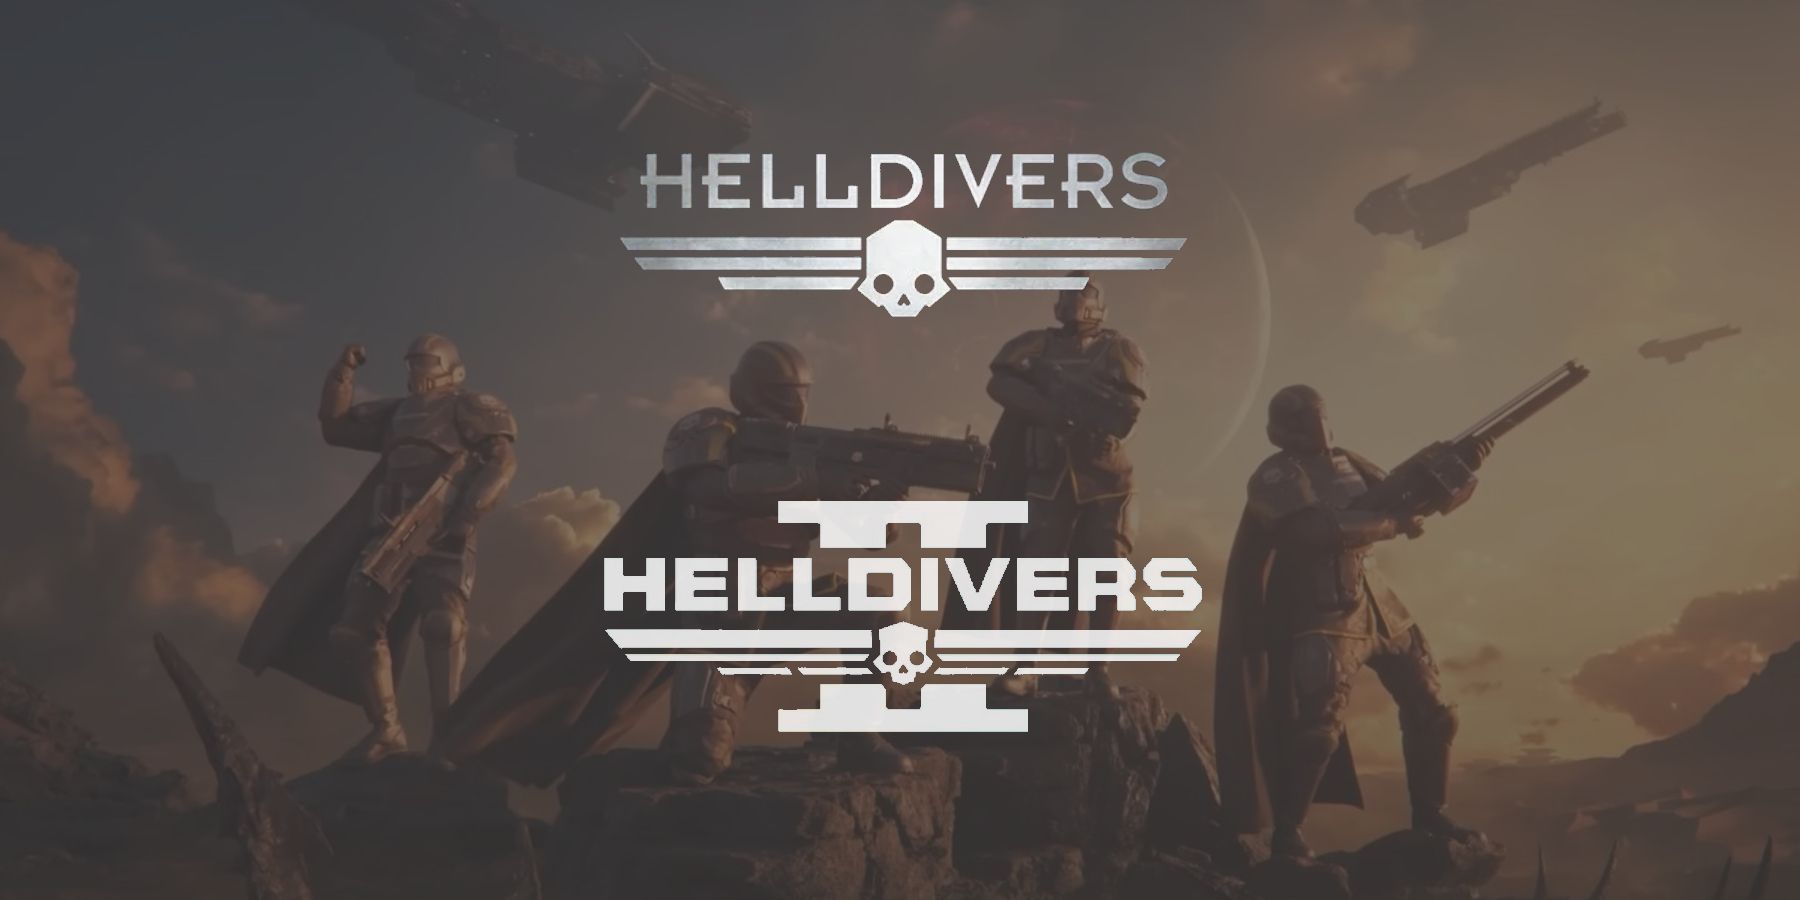 Ever Original Helldivers 1 content feature Missing From Helldivers 2 at launch